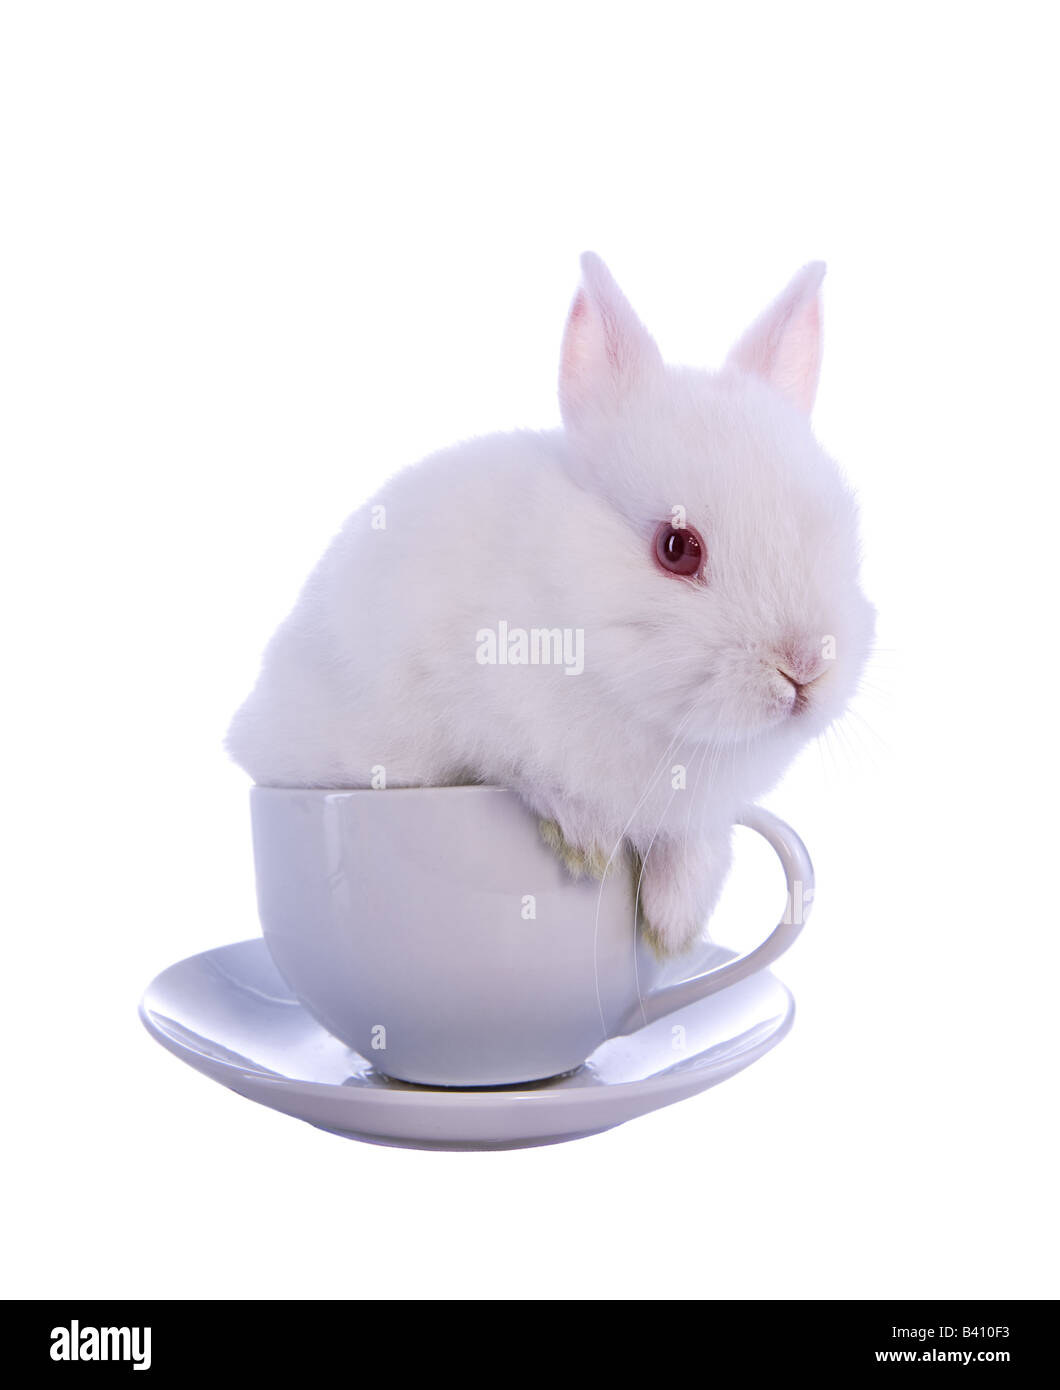 White Netherland Dwarf baby bunny rabbit in tea cup isolated on white Stock Photo